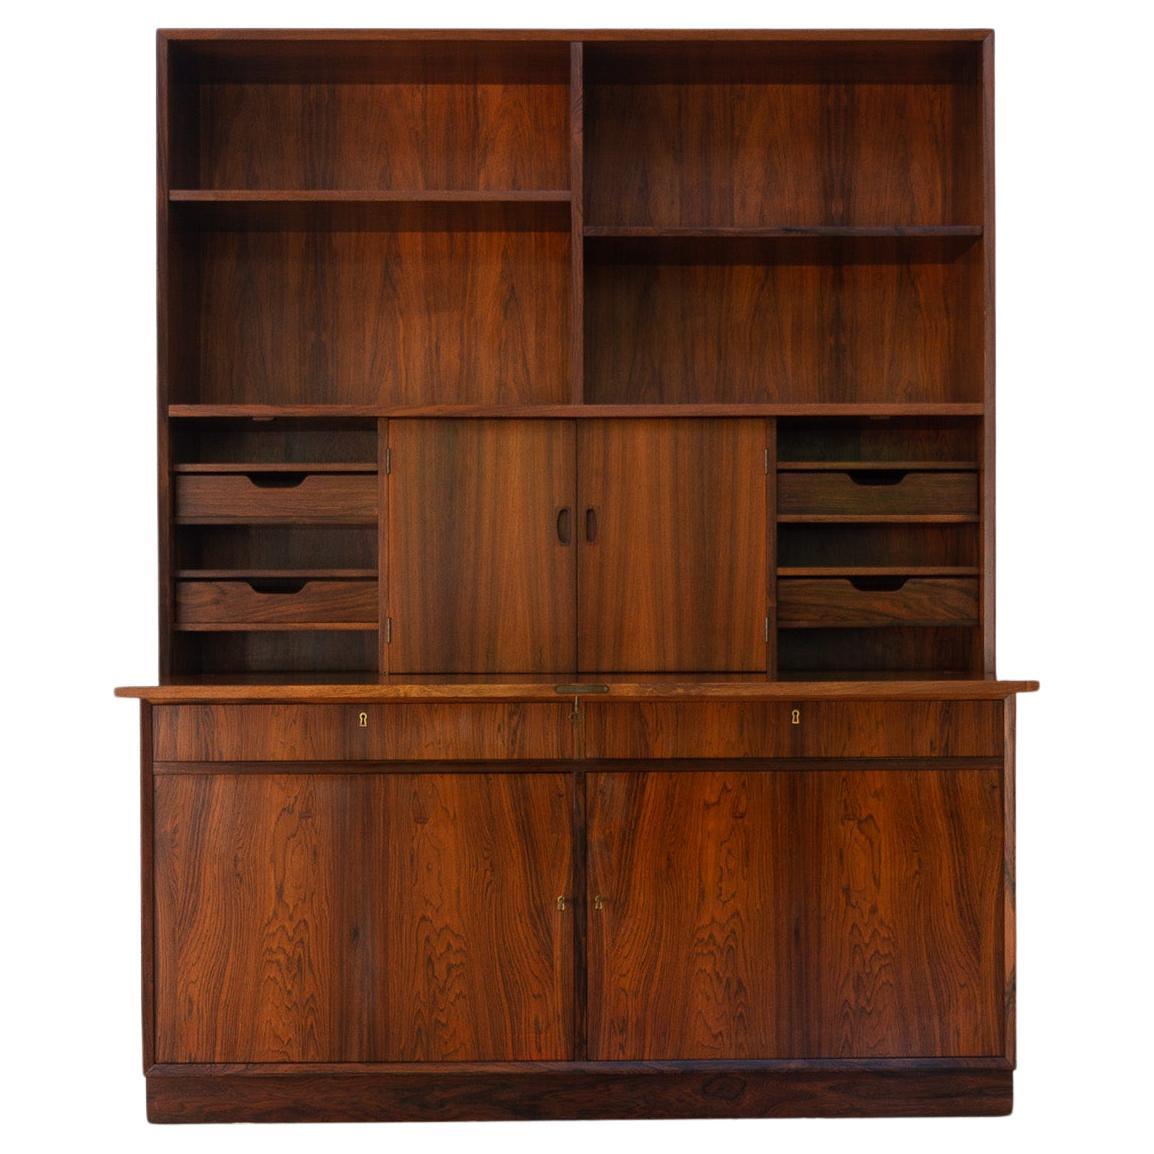 Mid-Century Modern Danish Rosewood Bookcase with Desk, 1960s